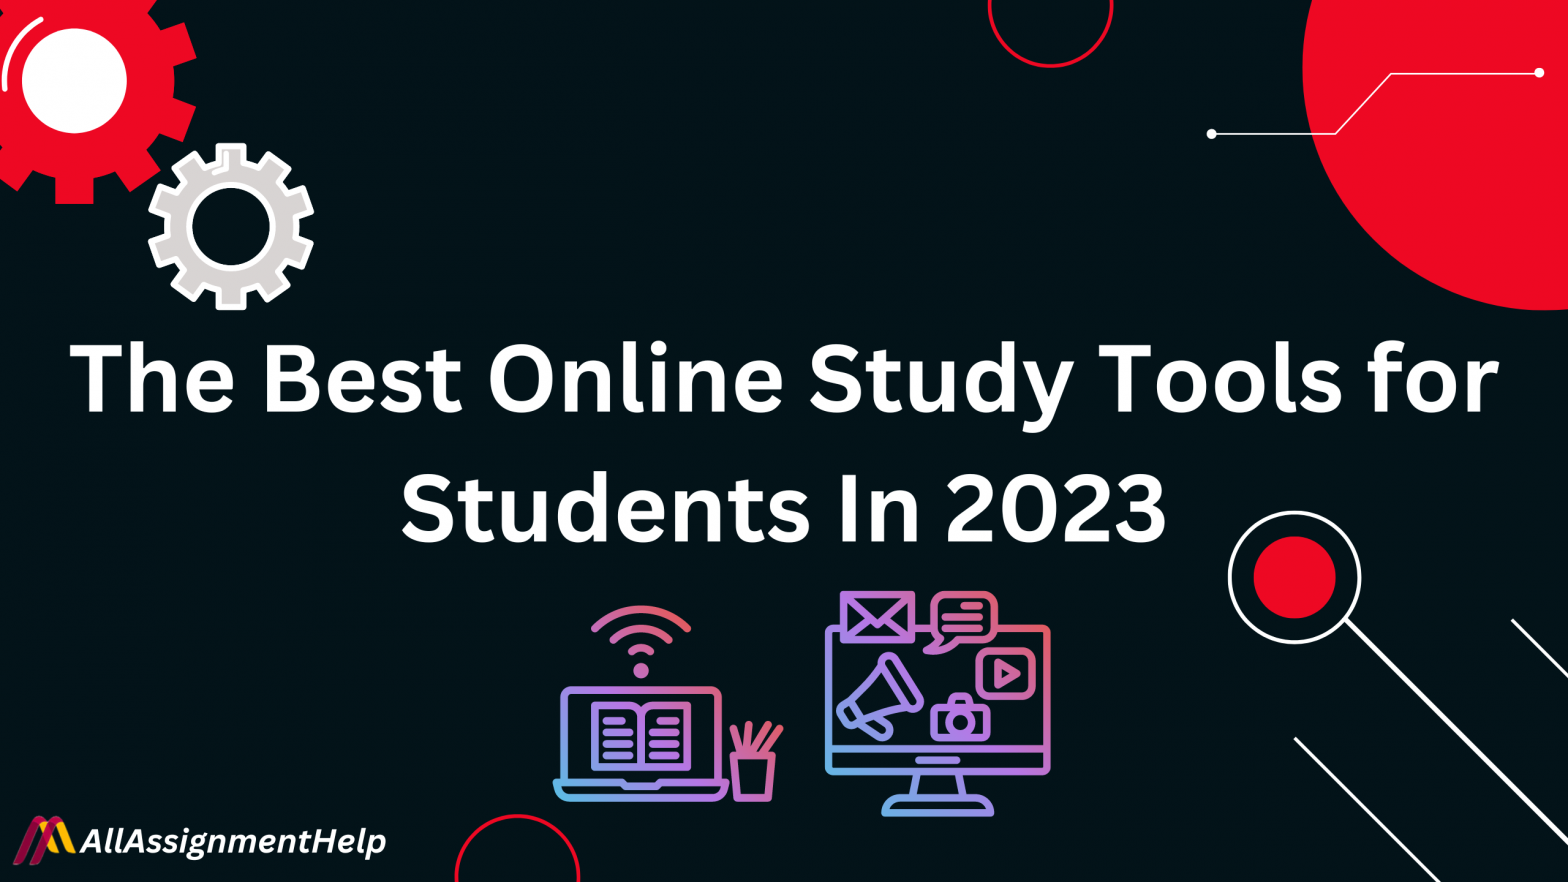 Best Online Study Tools for Students